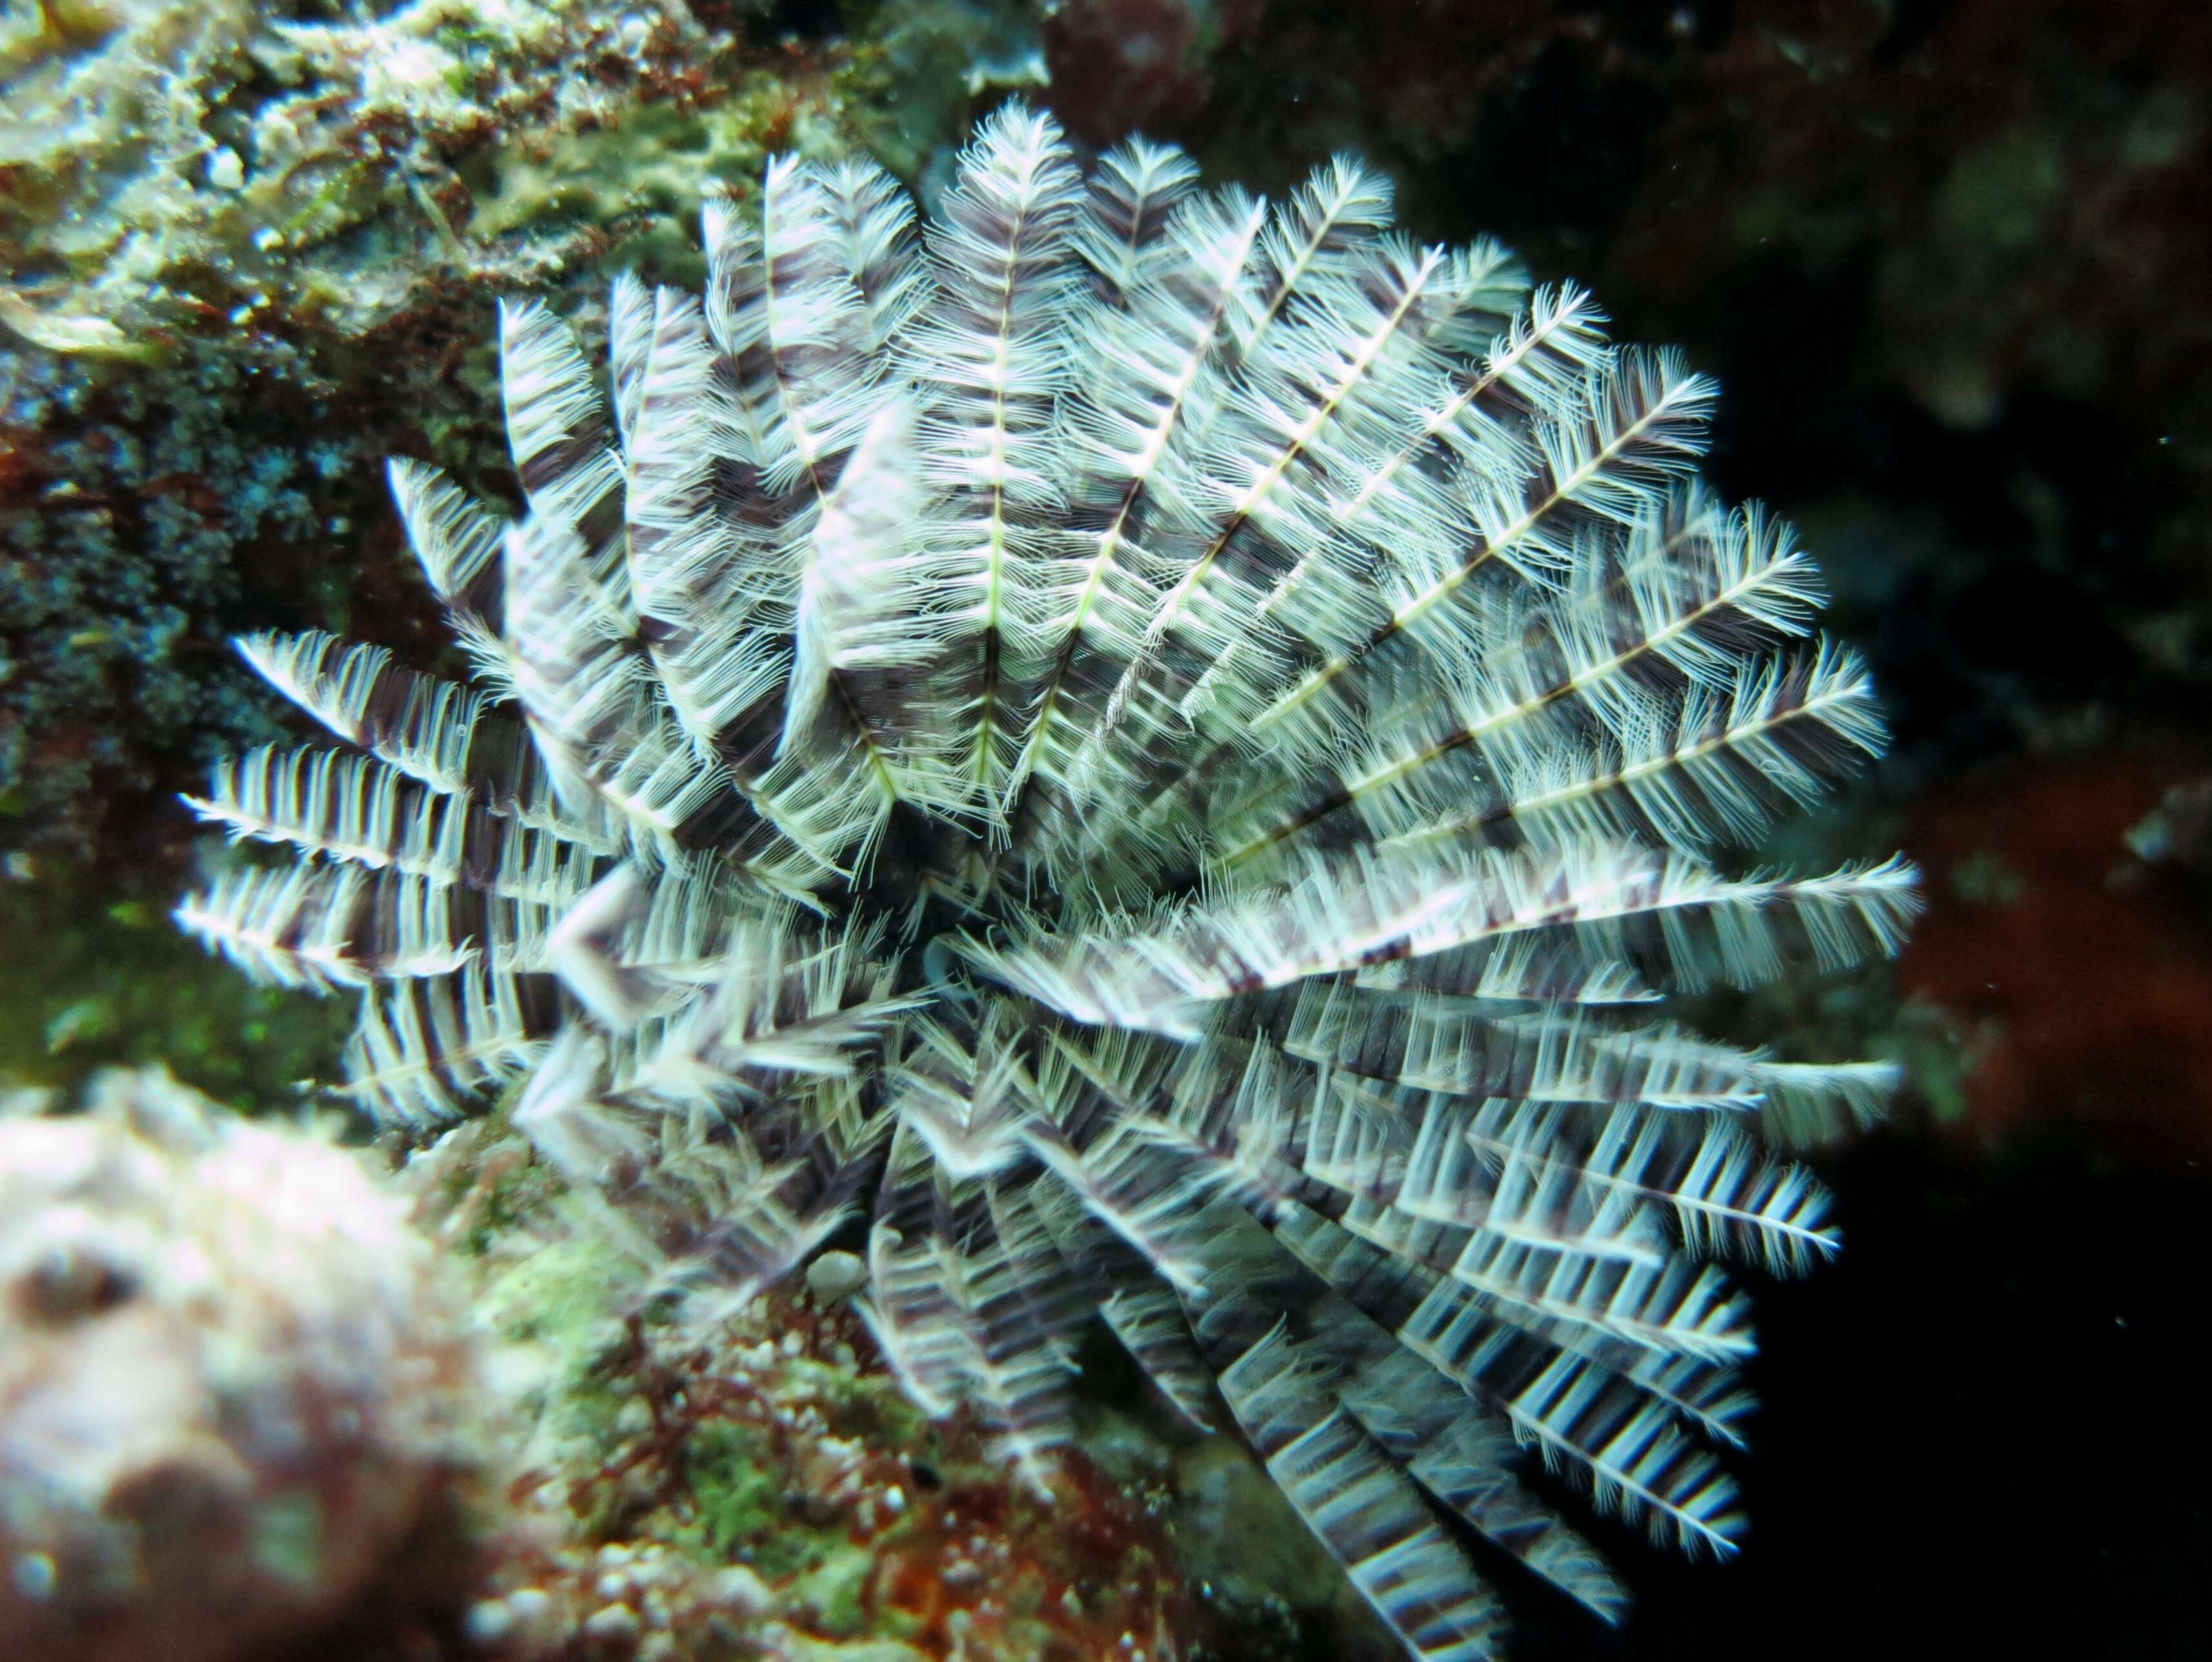 Image of Feather Duster Worms